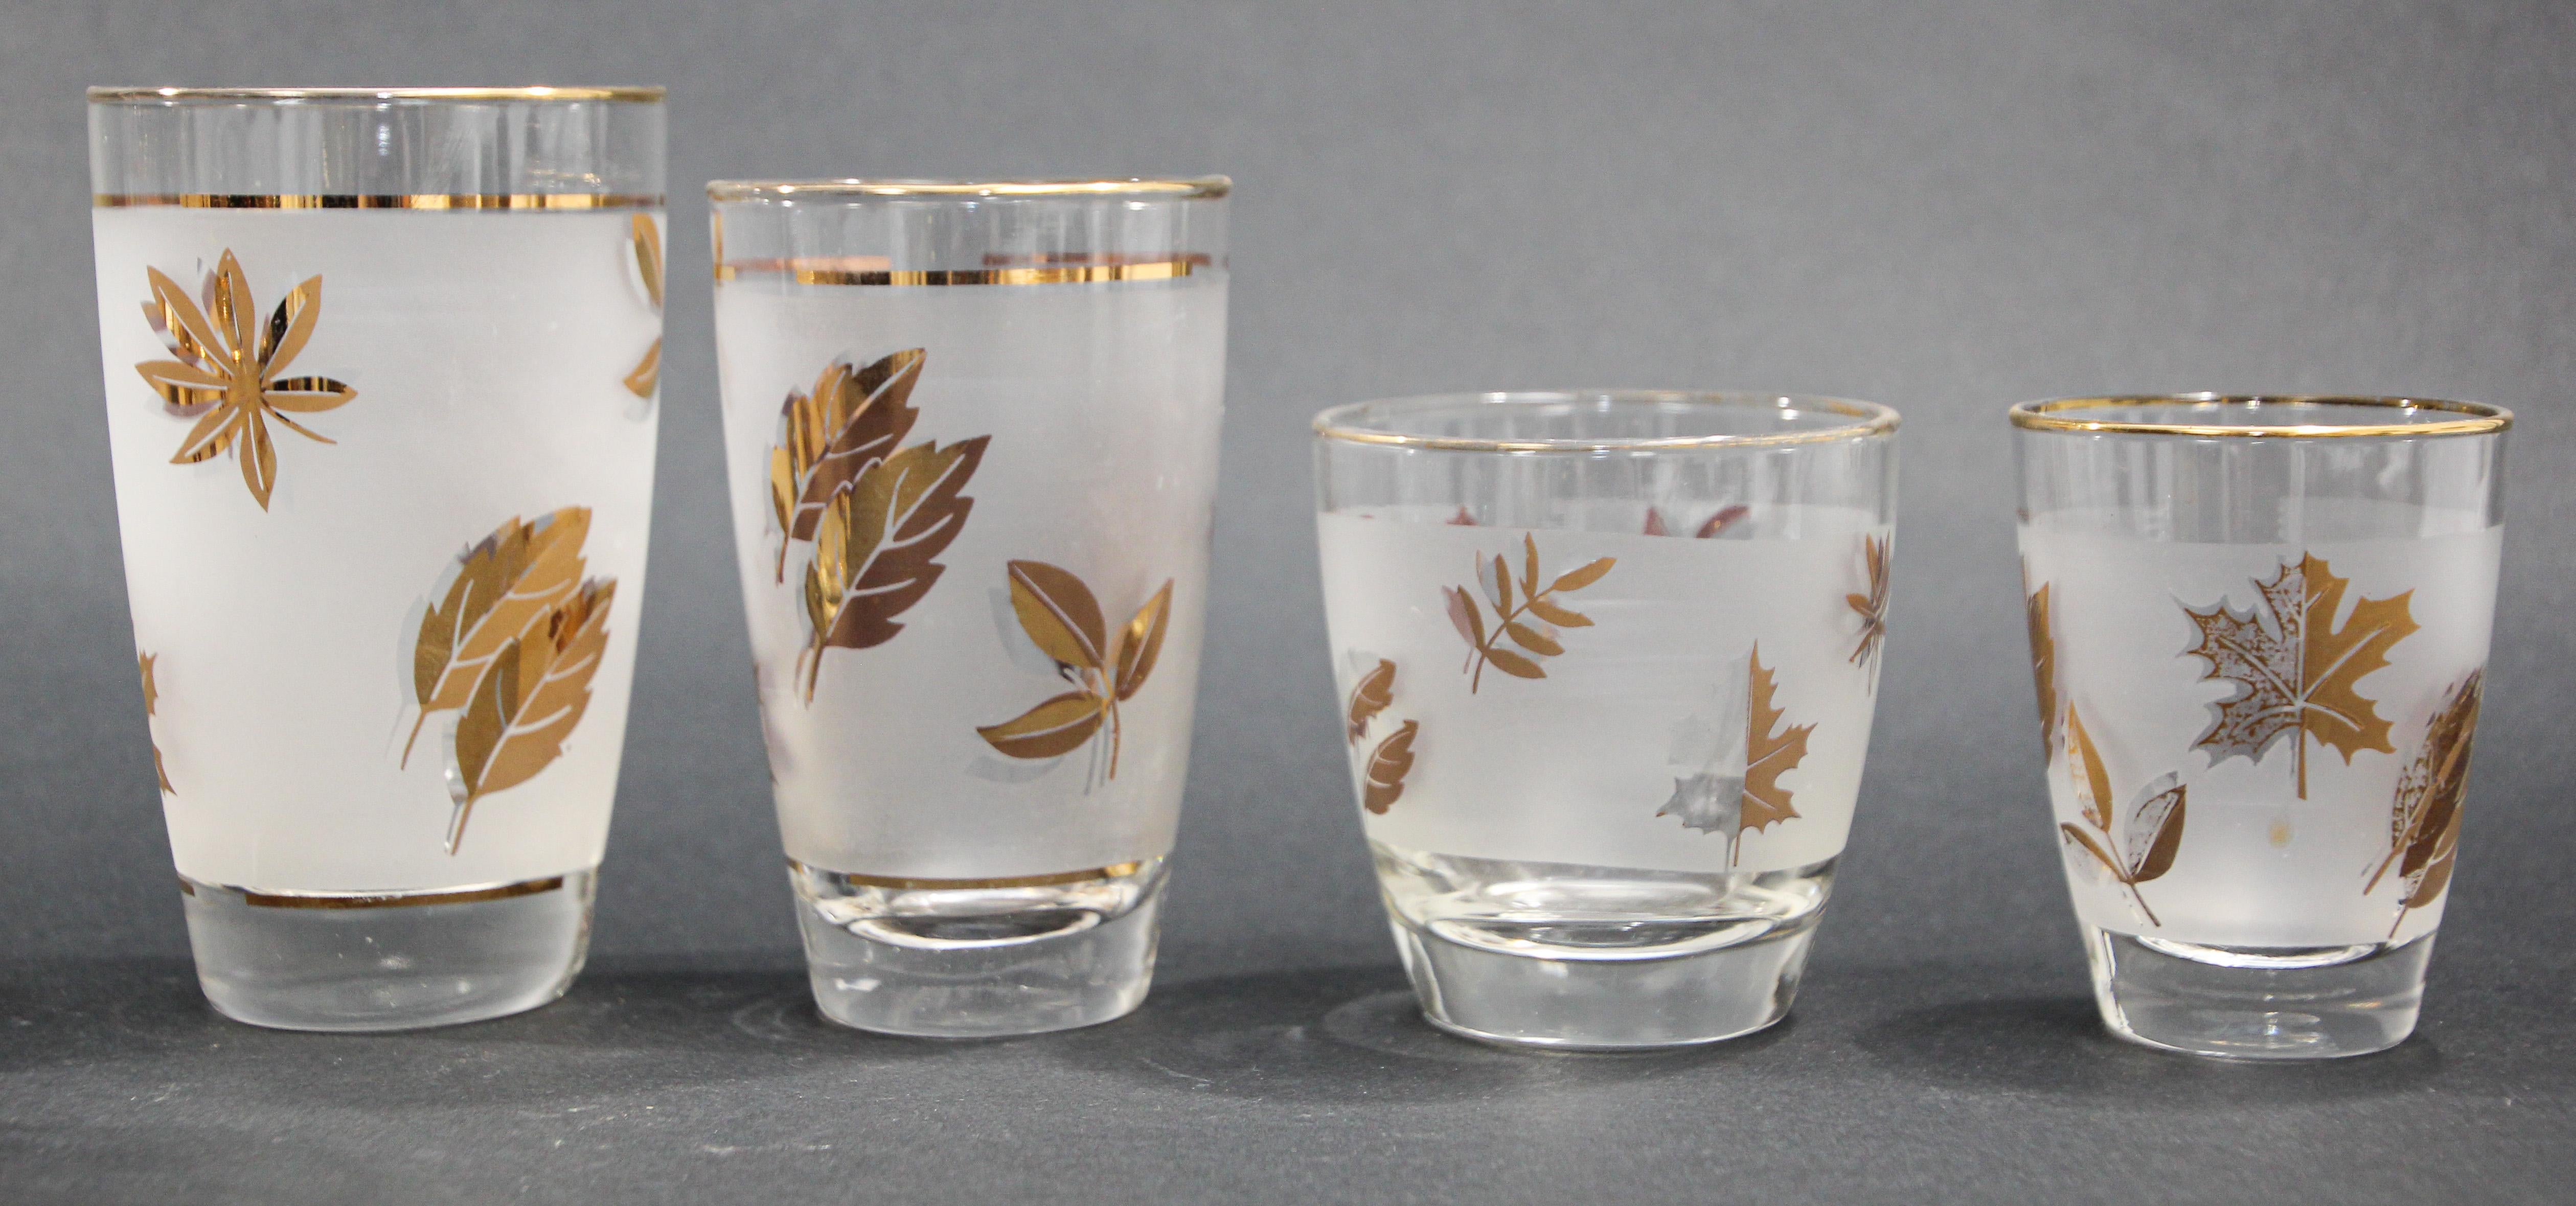 antique glasses with gold leaves